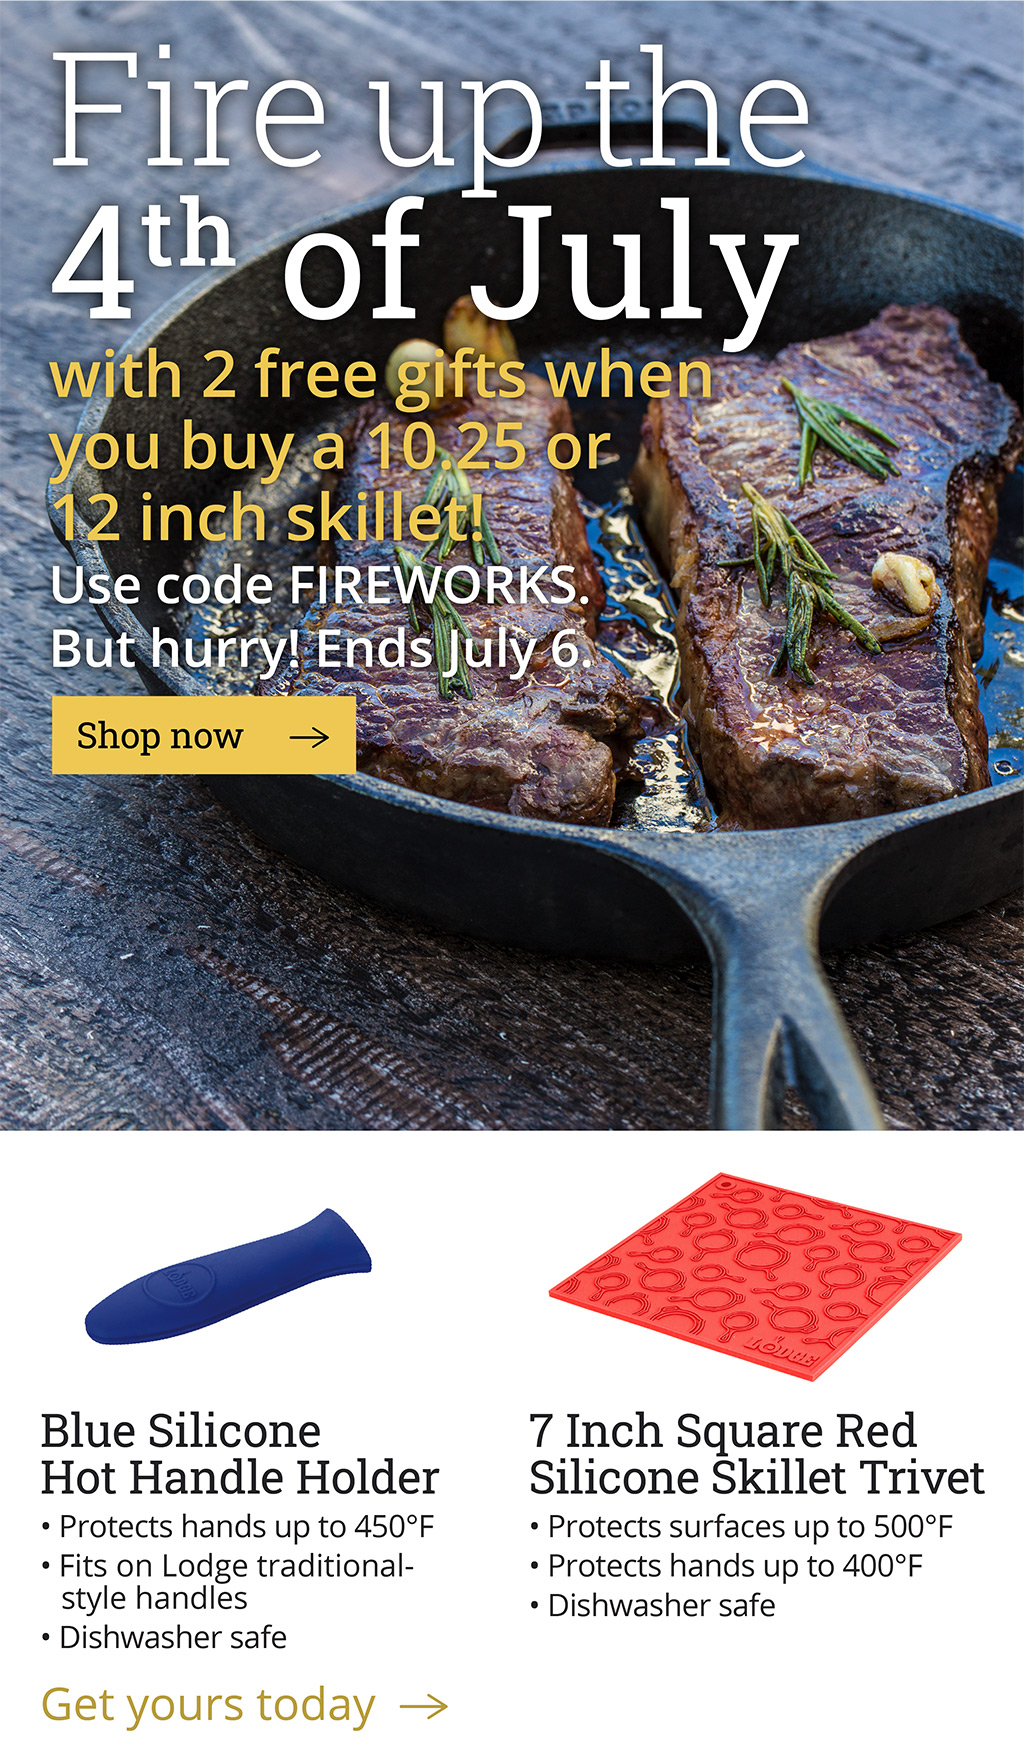  Fire up the 4th of July with 2 free gifts  when you buy a 10.25 or 12 inch skillet!  Use code FIREWORKS.  But hurry! Ends July 6.  [Shop now-->]  Blue Silicone Hot Handle Holder -Protects hands up to 500?F -Fits on Lodge traditional-style handles, 9+ inches -Dishwasher safe  7 Inch Square Red Silicone Skillet Trivet -Protects surfaces up to 500?F -Protects hands up to 400?F -Dishwasher safe  [Get yours today-->]